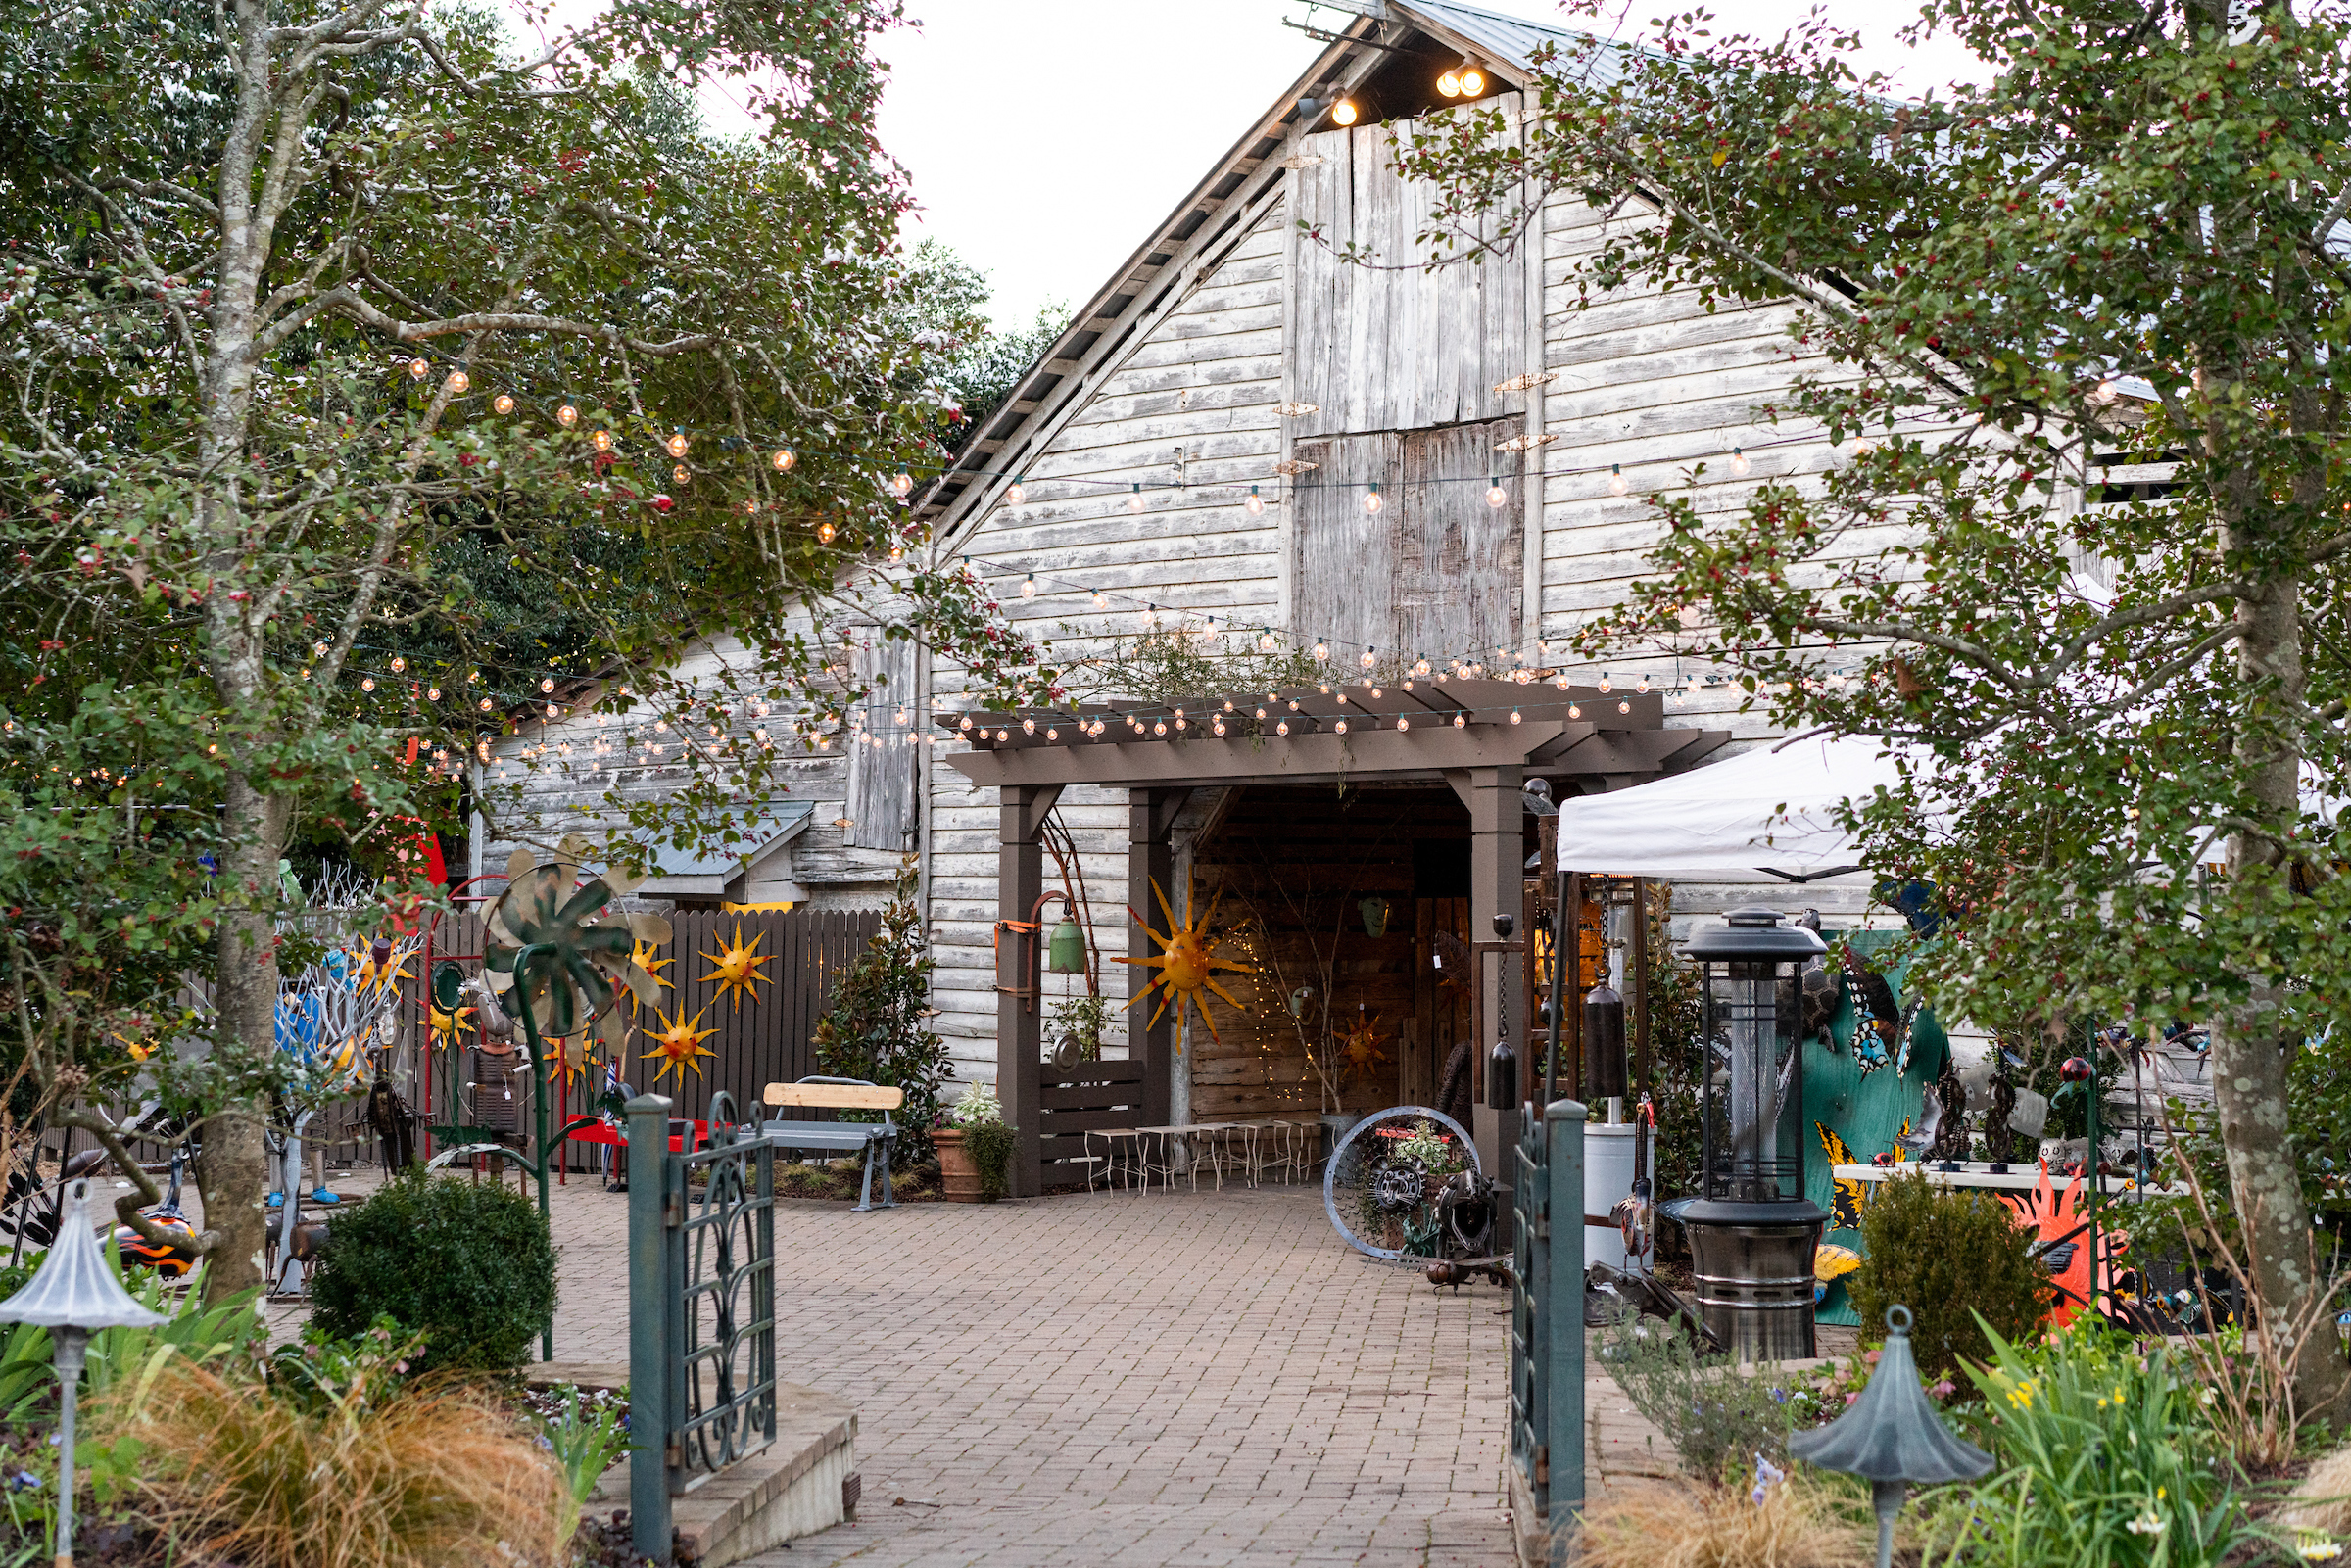 Melrose Arts & Crafts Festival - City of Natchitoches, Louisiana